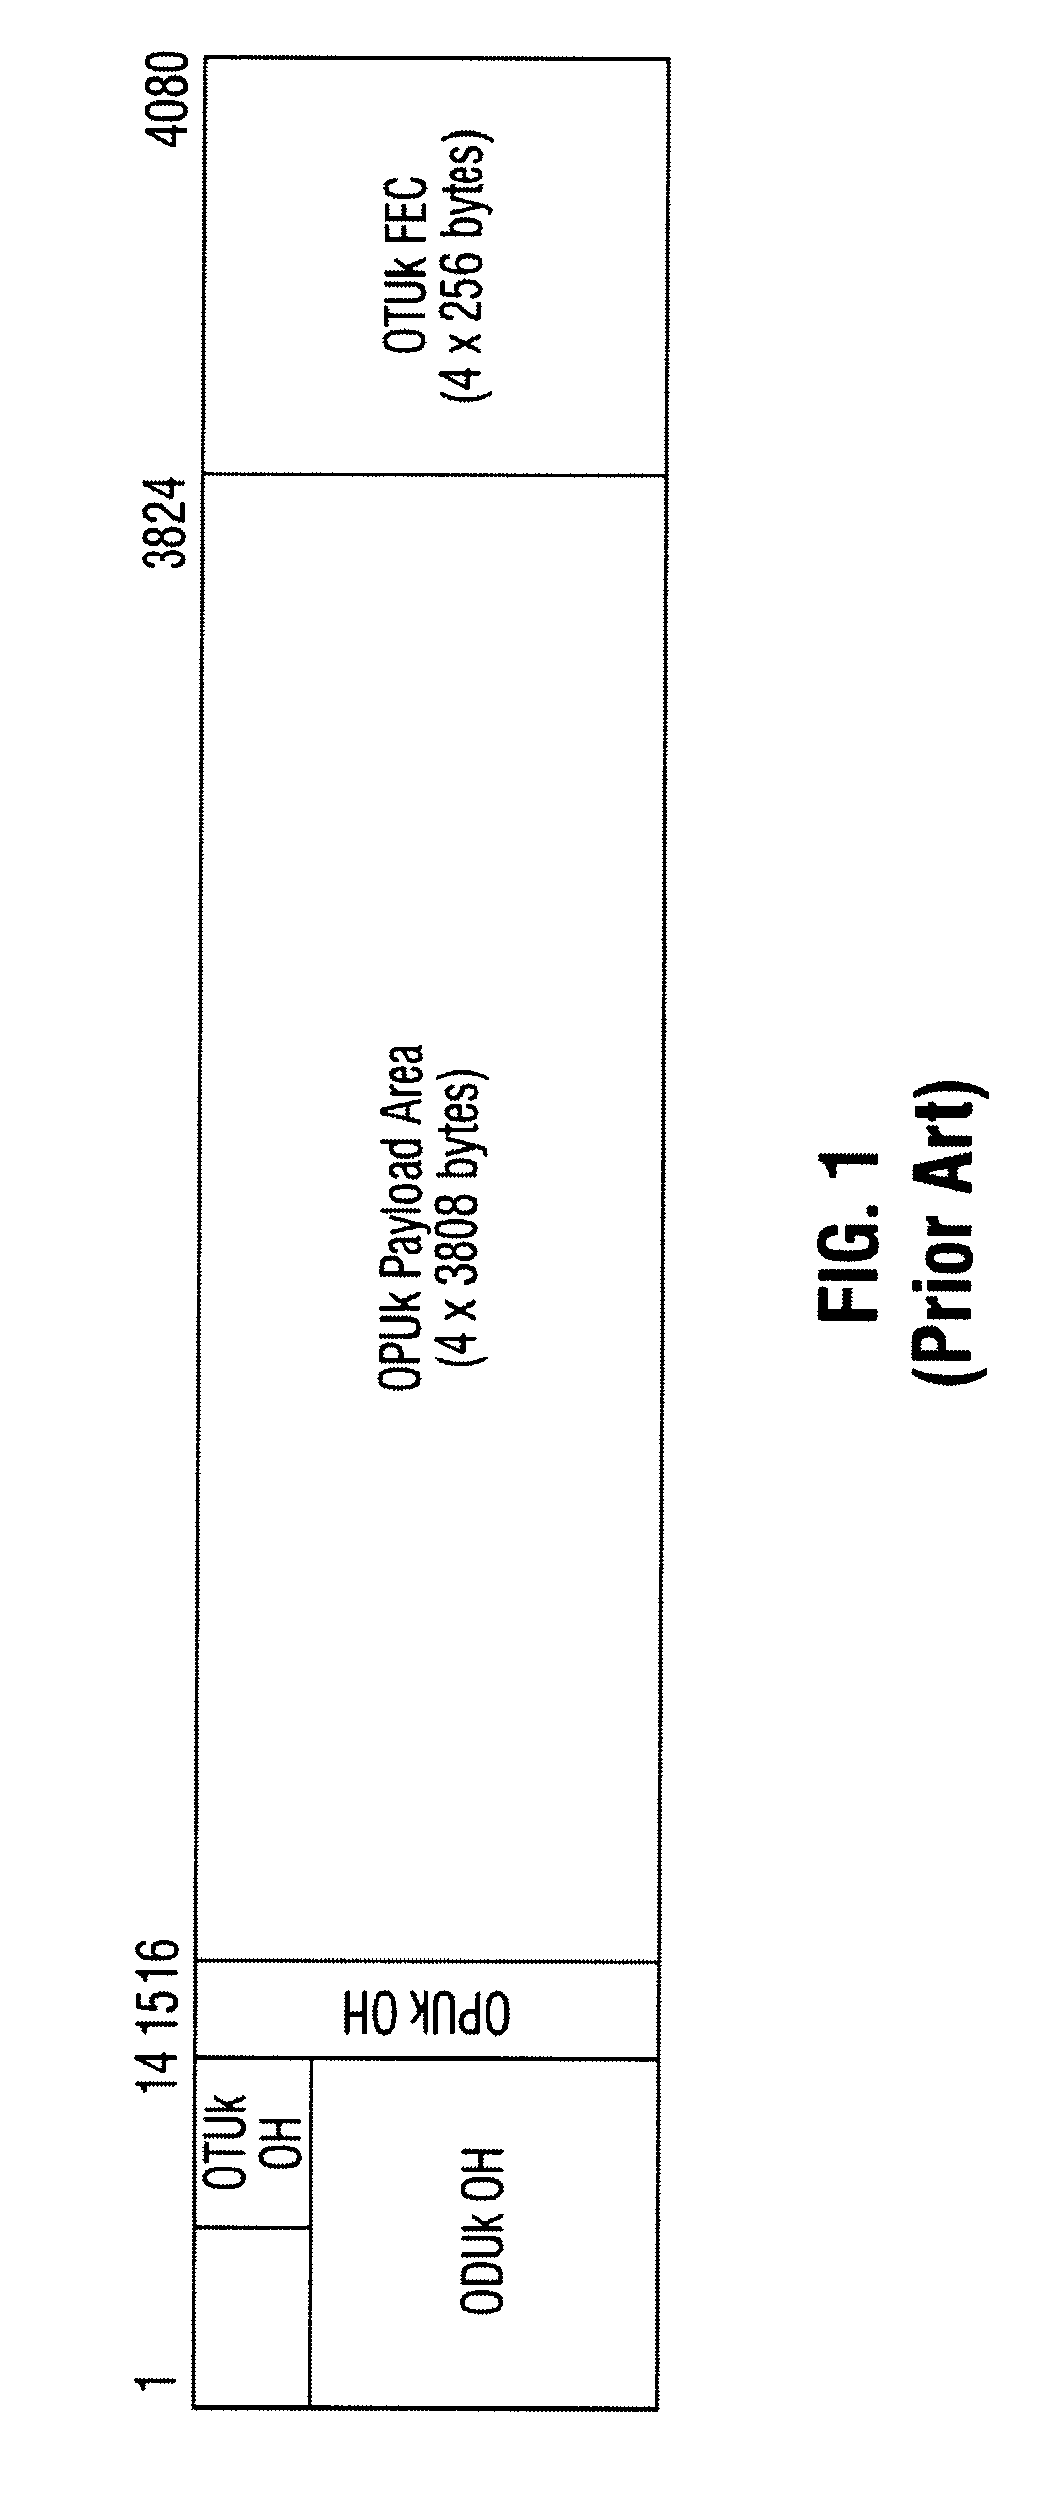 System and Method for Transporting Asynchronous ODUk Signals over a Synchronous Interface